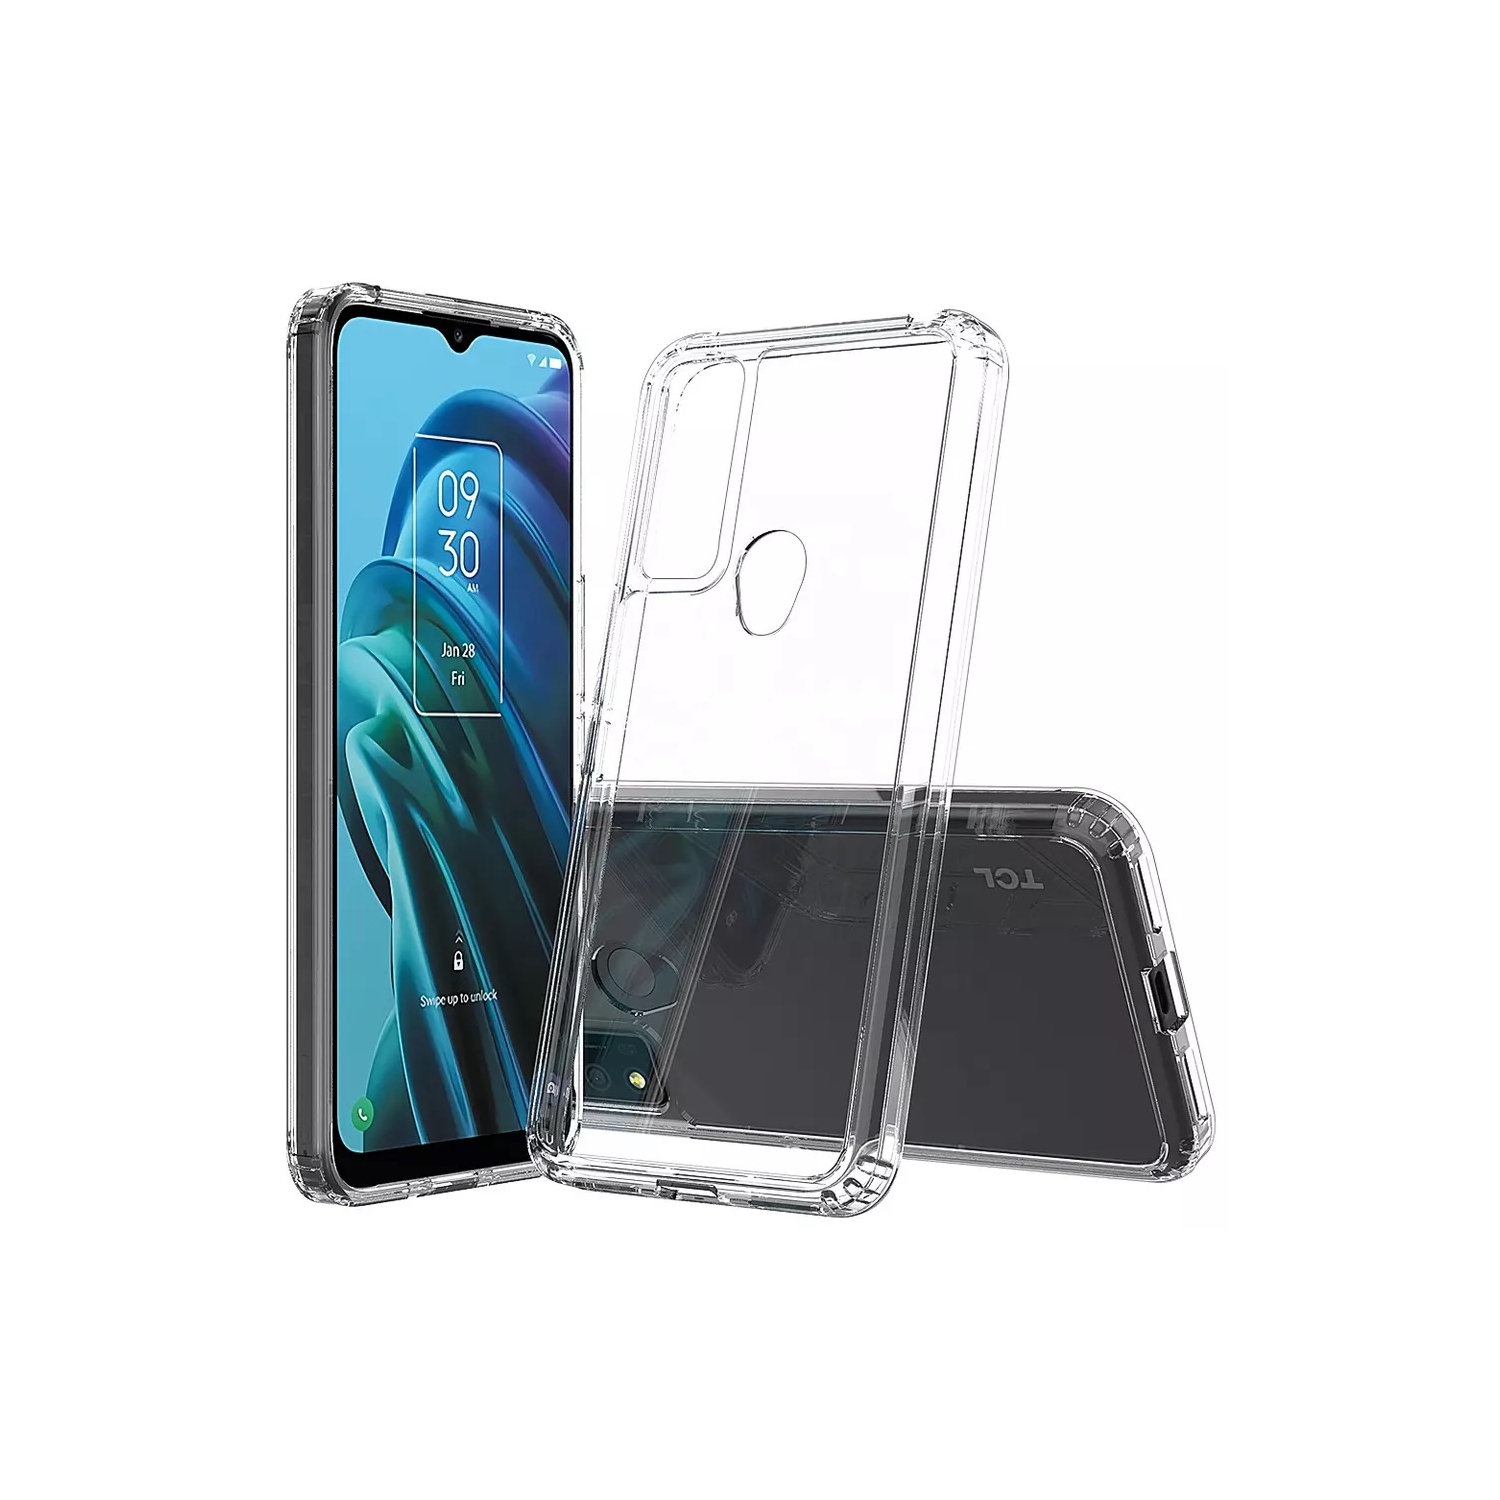 XCRS Slim Shockproof Crystal Clear Acrylic Cover with Complete overall Protection, bumper, and reinforced edges hard-shell case for TCL 30 XE 5G 6.5 inch 2022 Phone